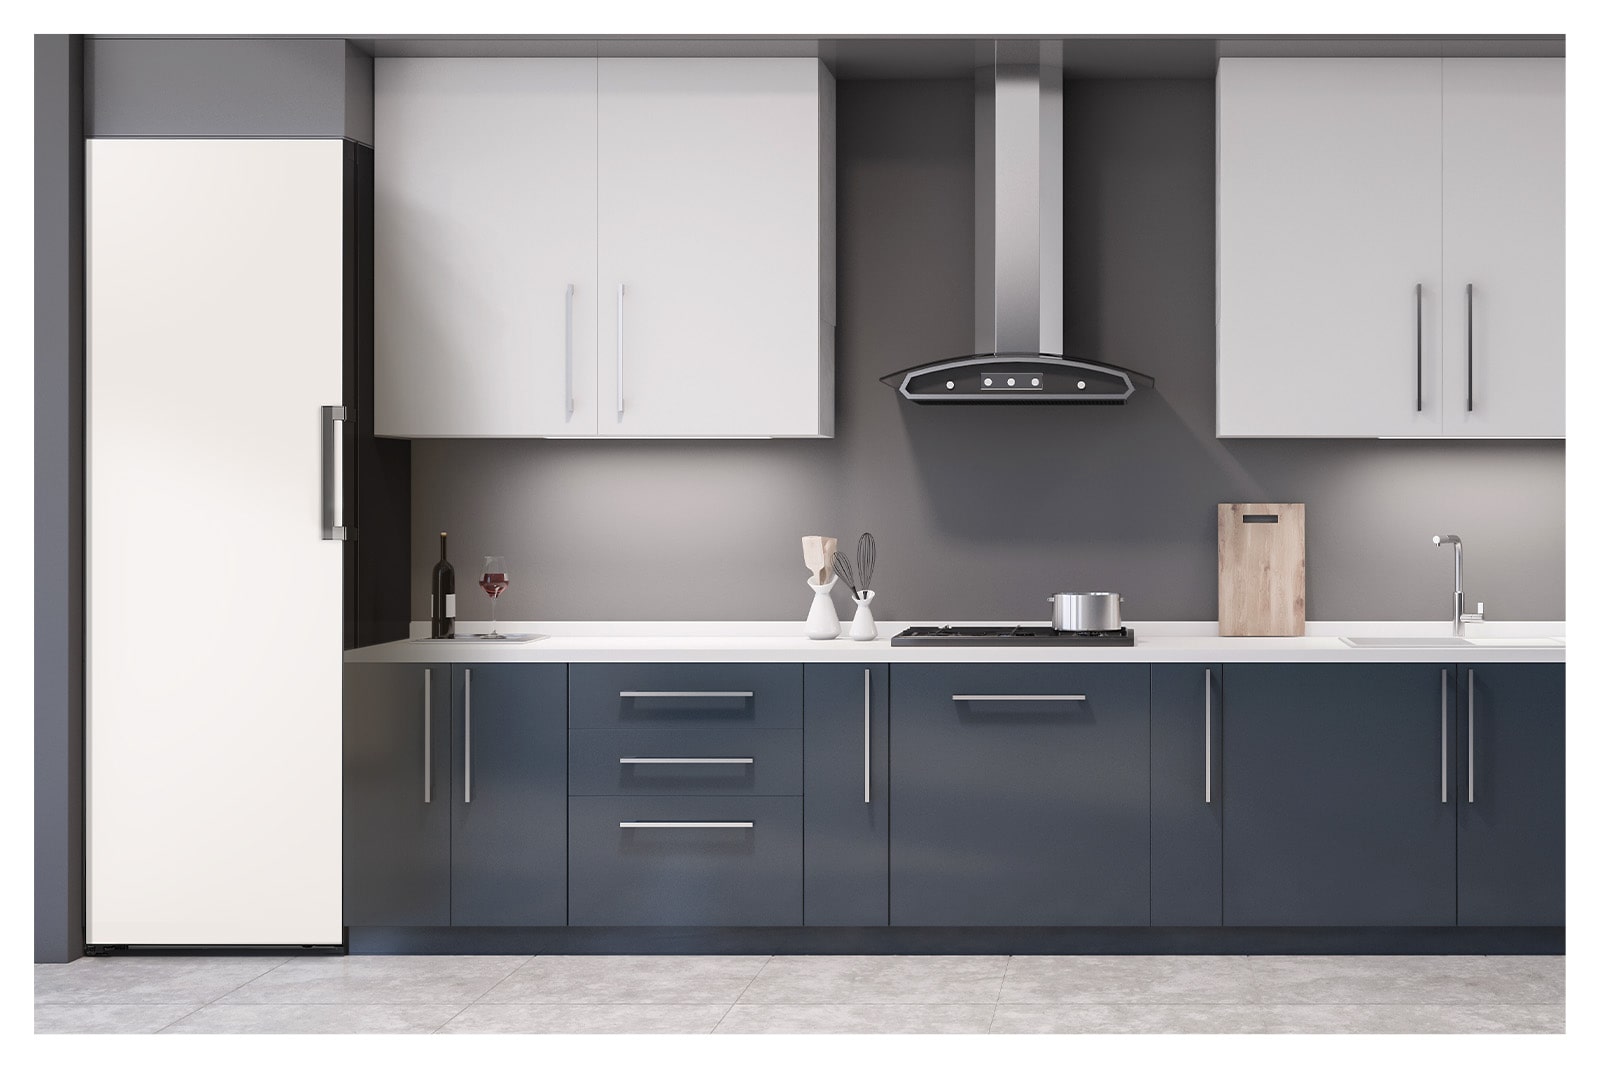 It shows mist beige color LG Freezer Objet Collection is placed in a dark-tone modern kitchen.